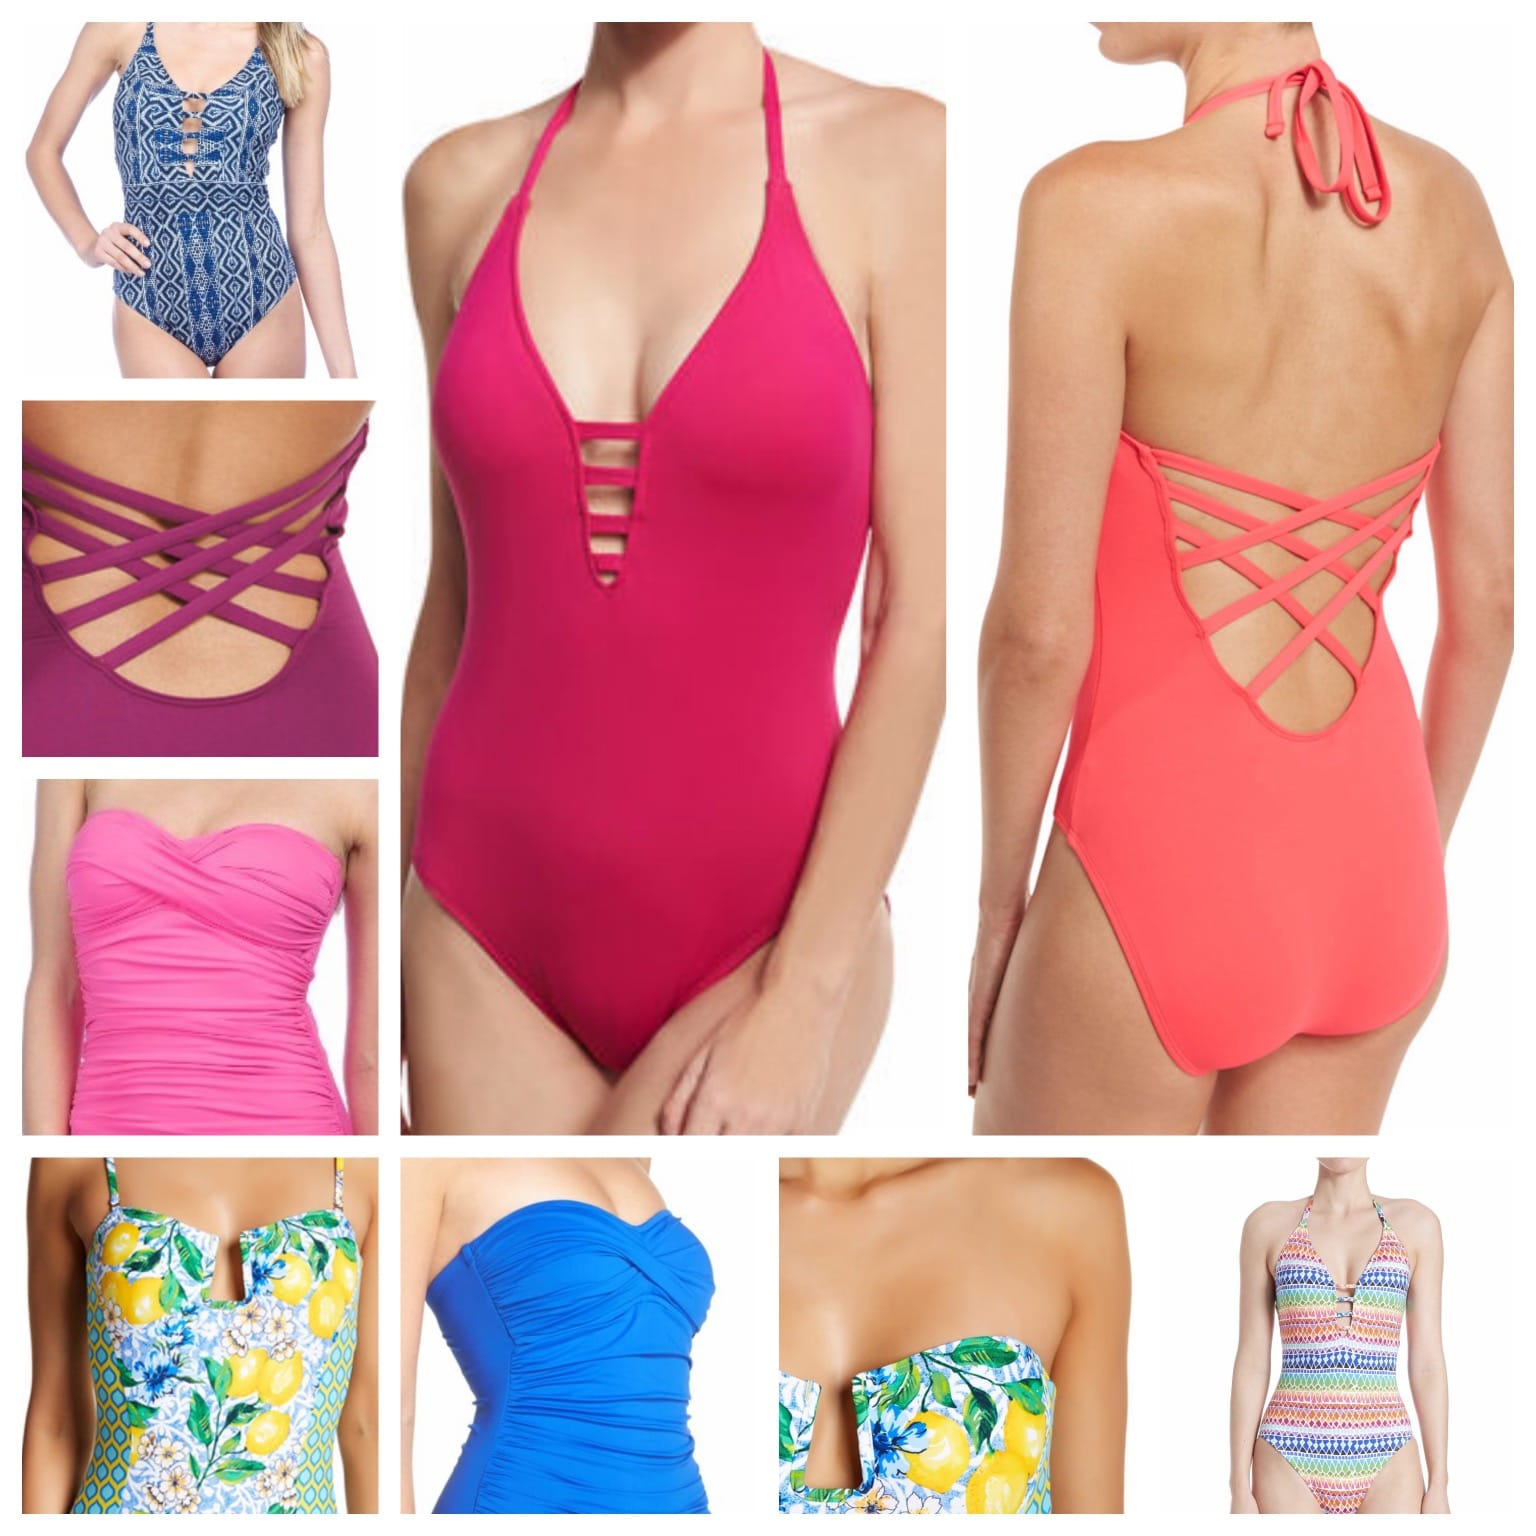 Trending Tuesday - Supportive Bathing Suits for Big Busts - April